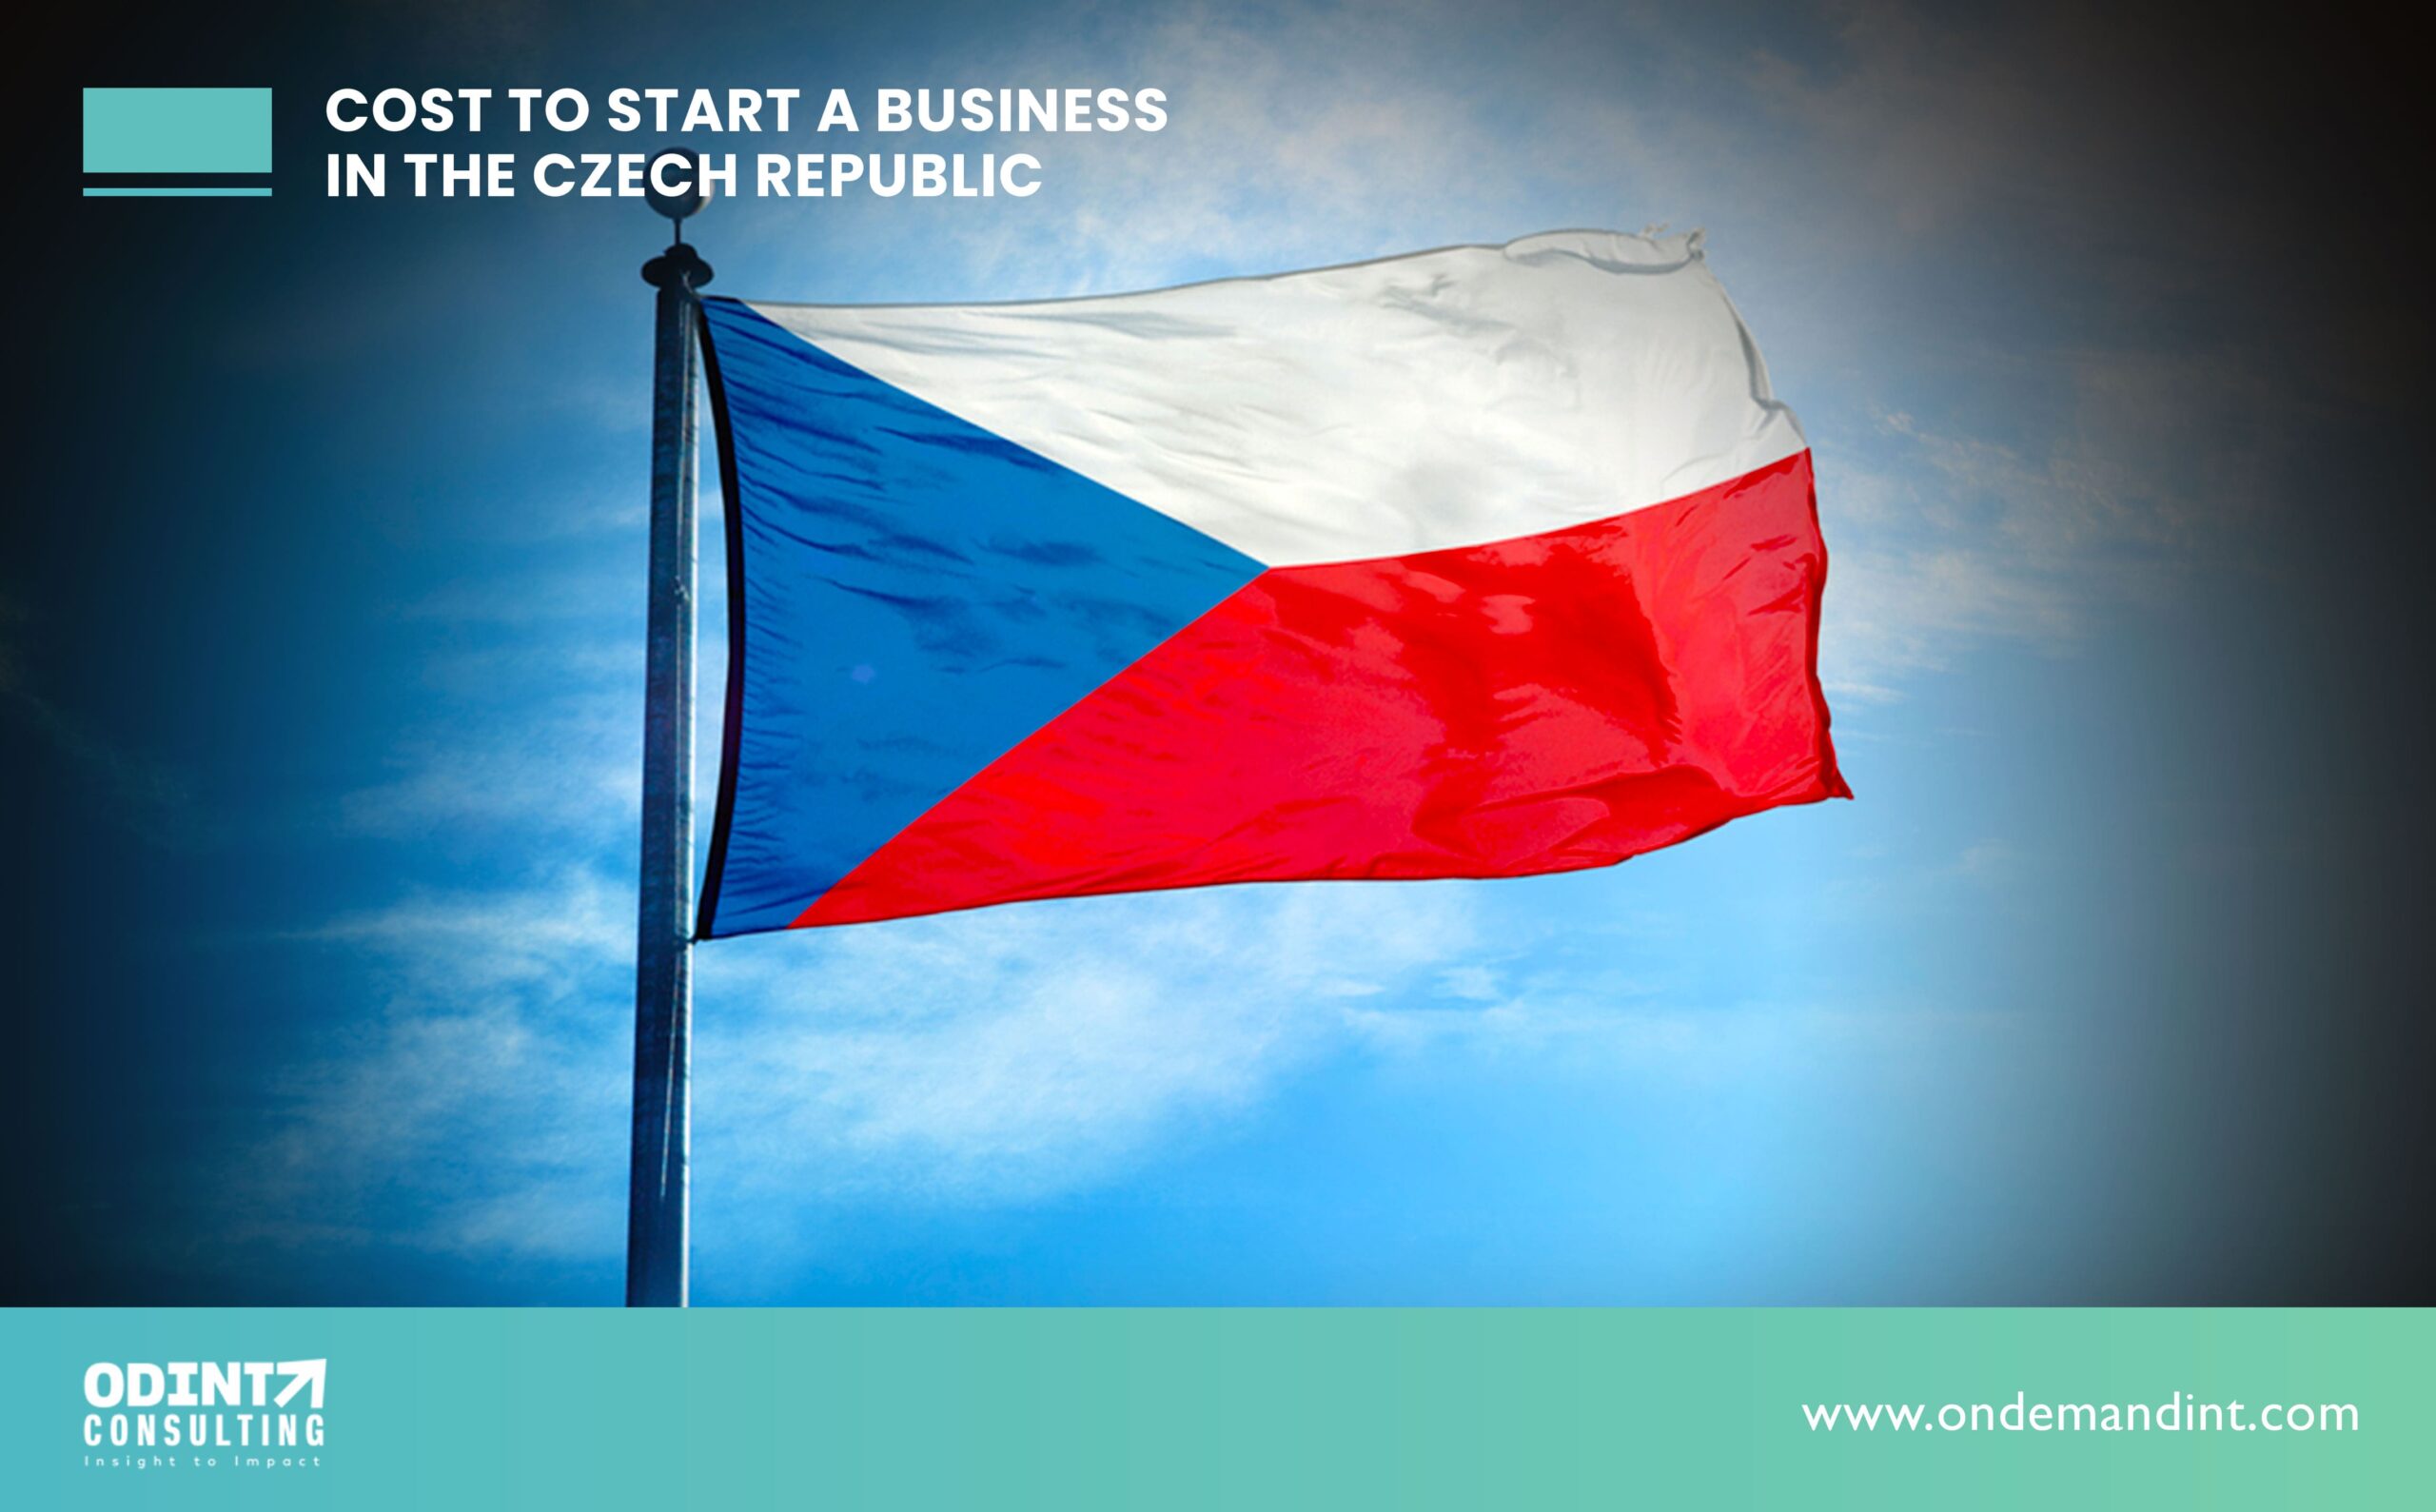 How Much Does It Cost To Start A Business In The Czech Republic?